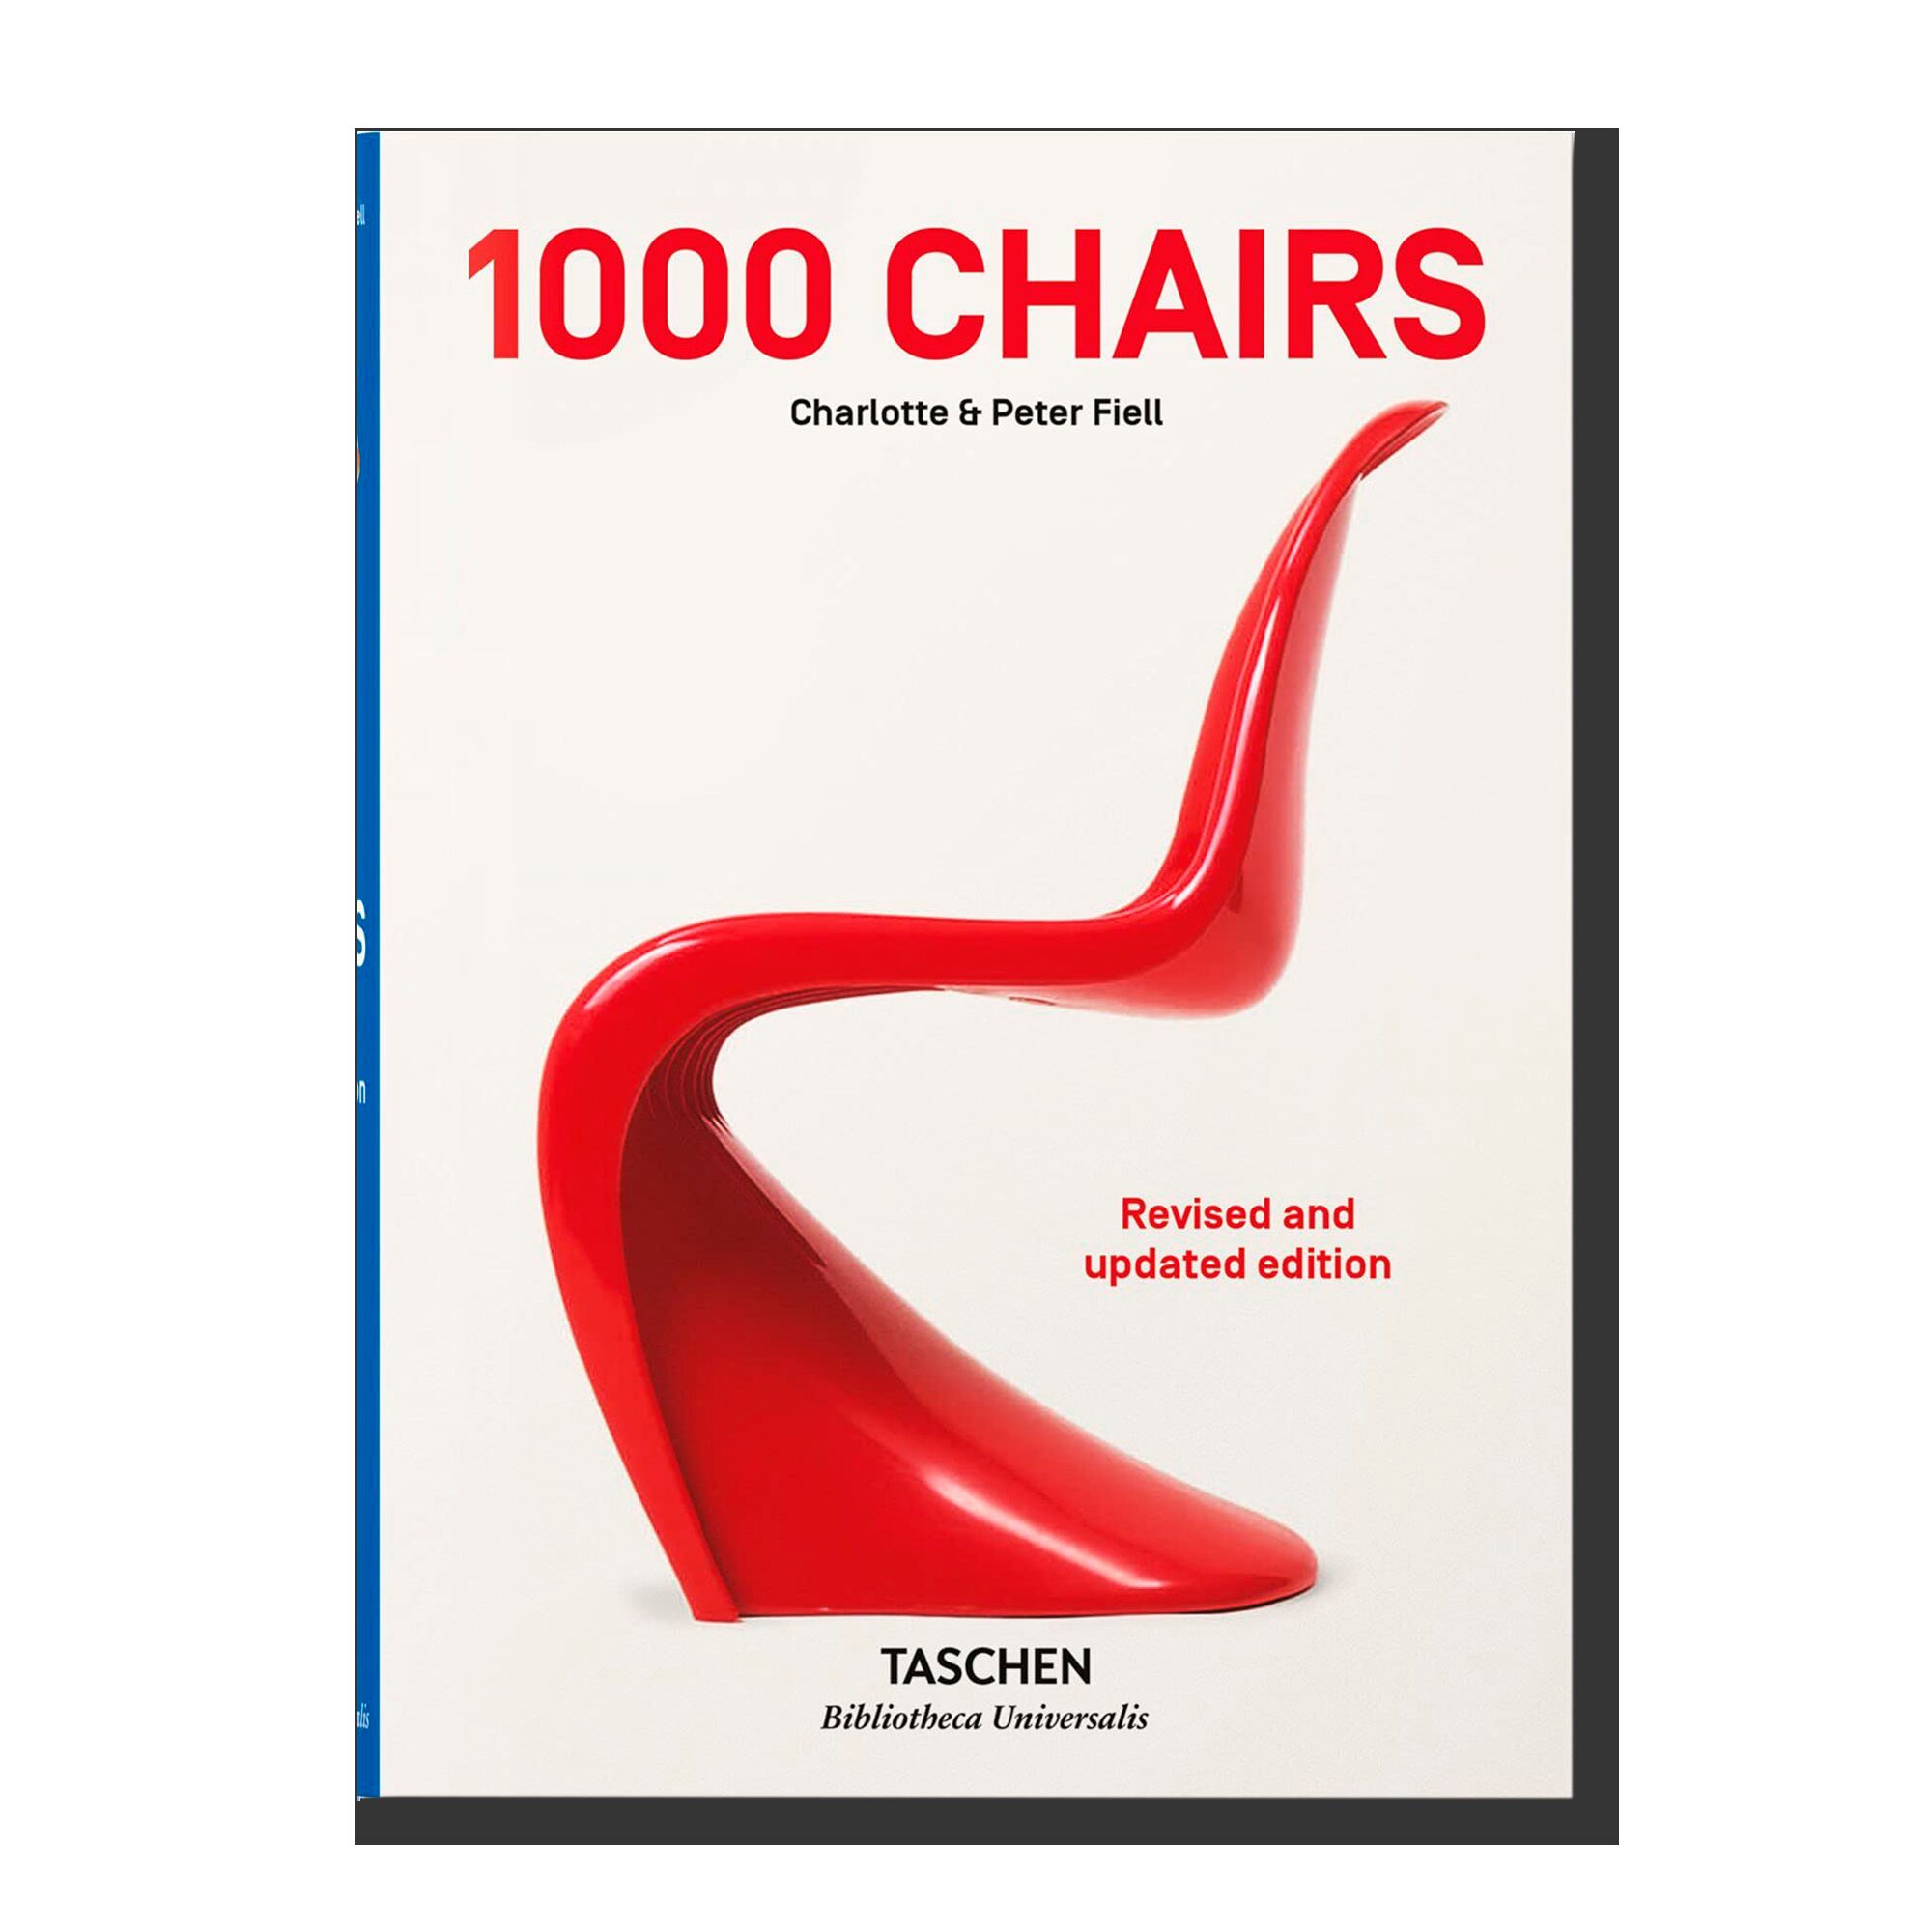 1000 Chairs. Revised and updated edition